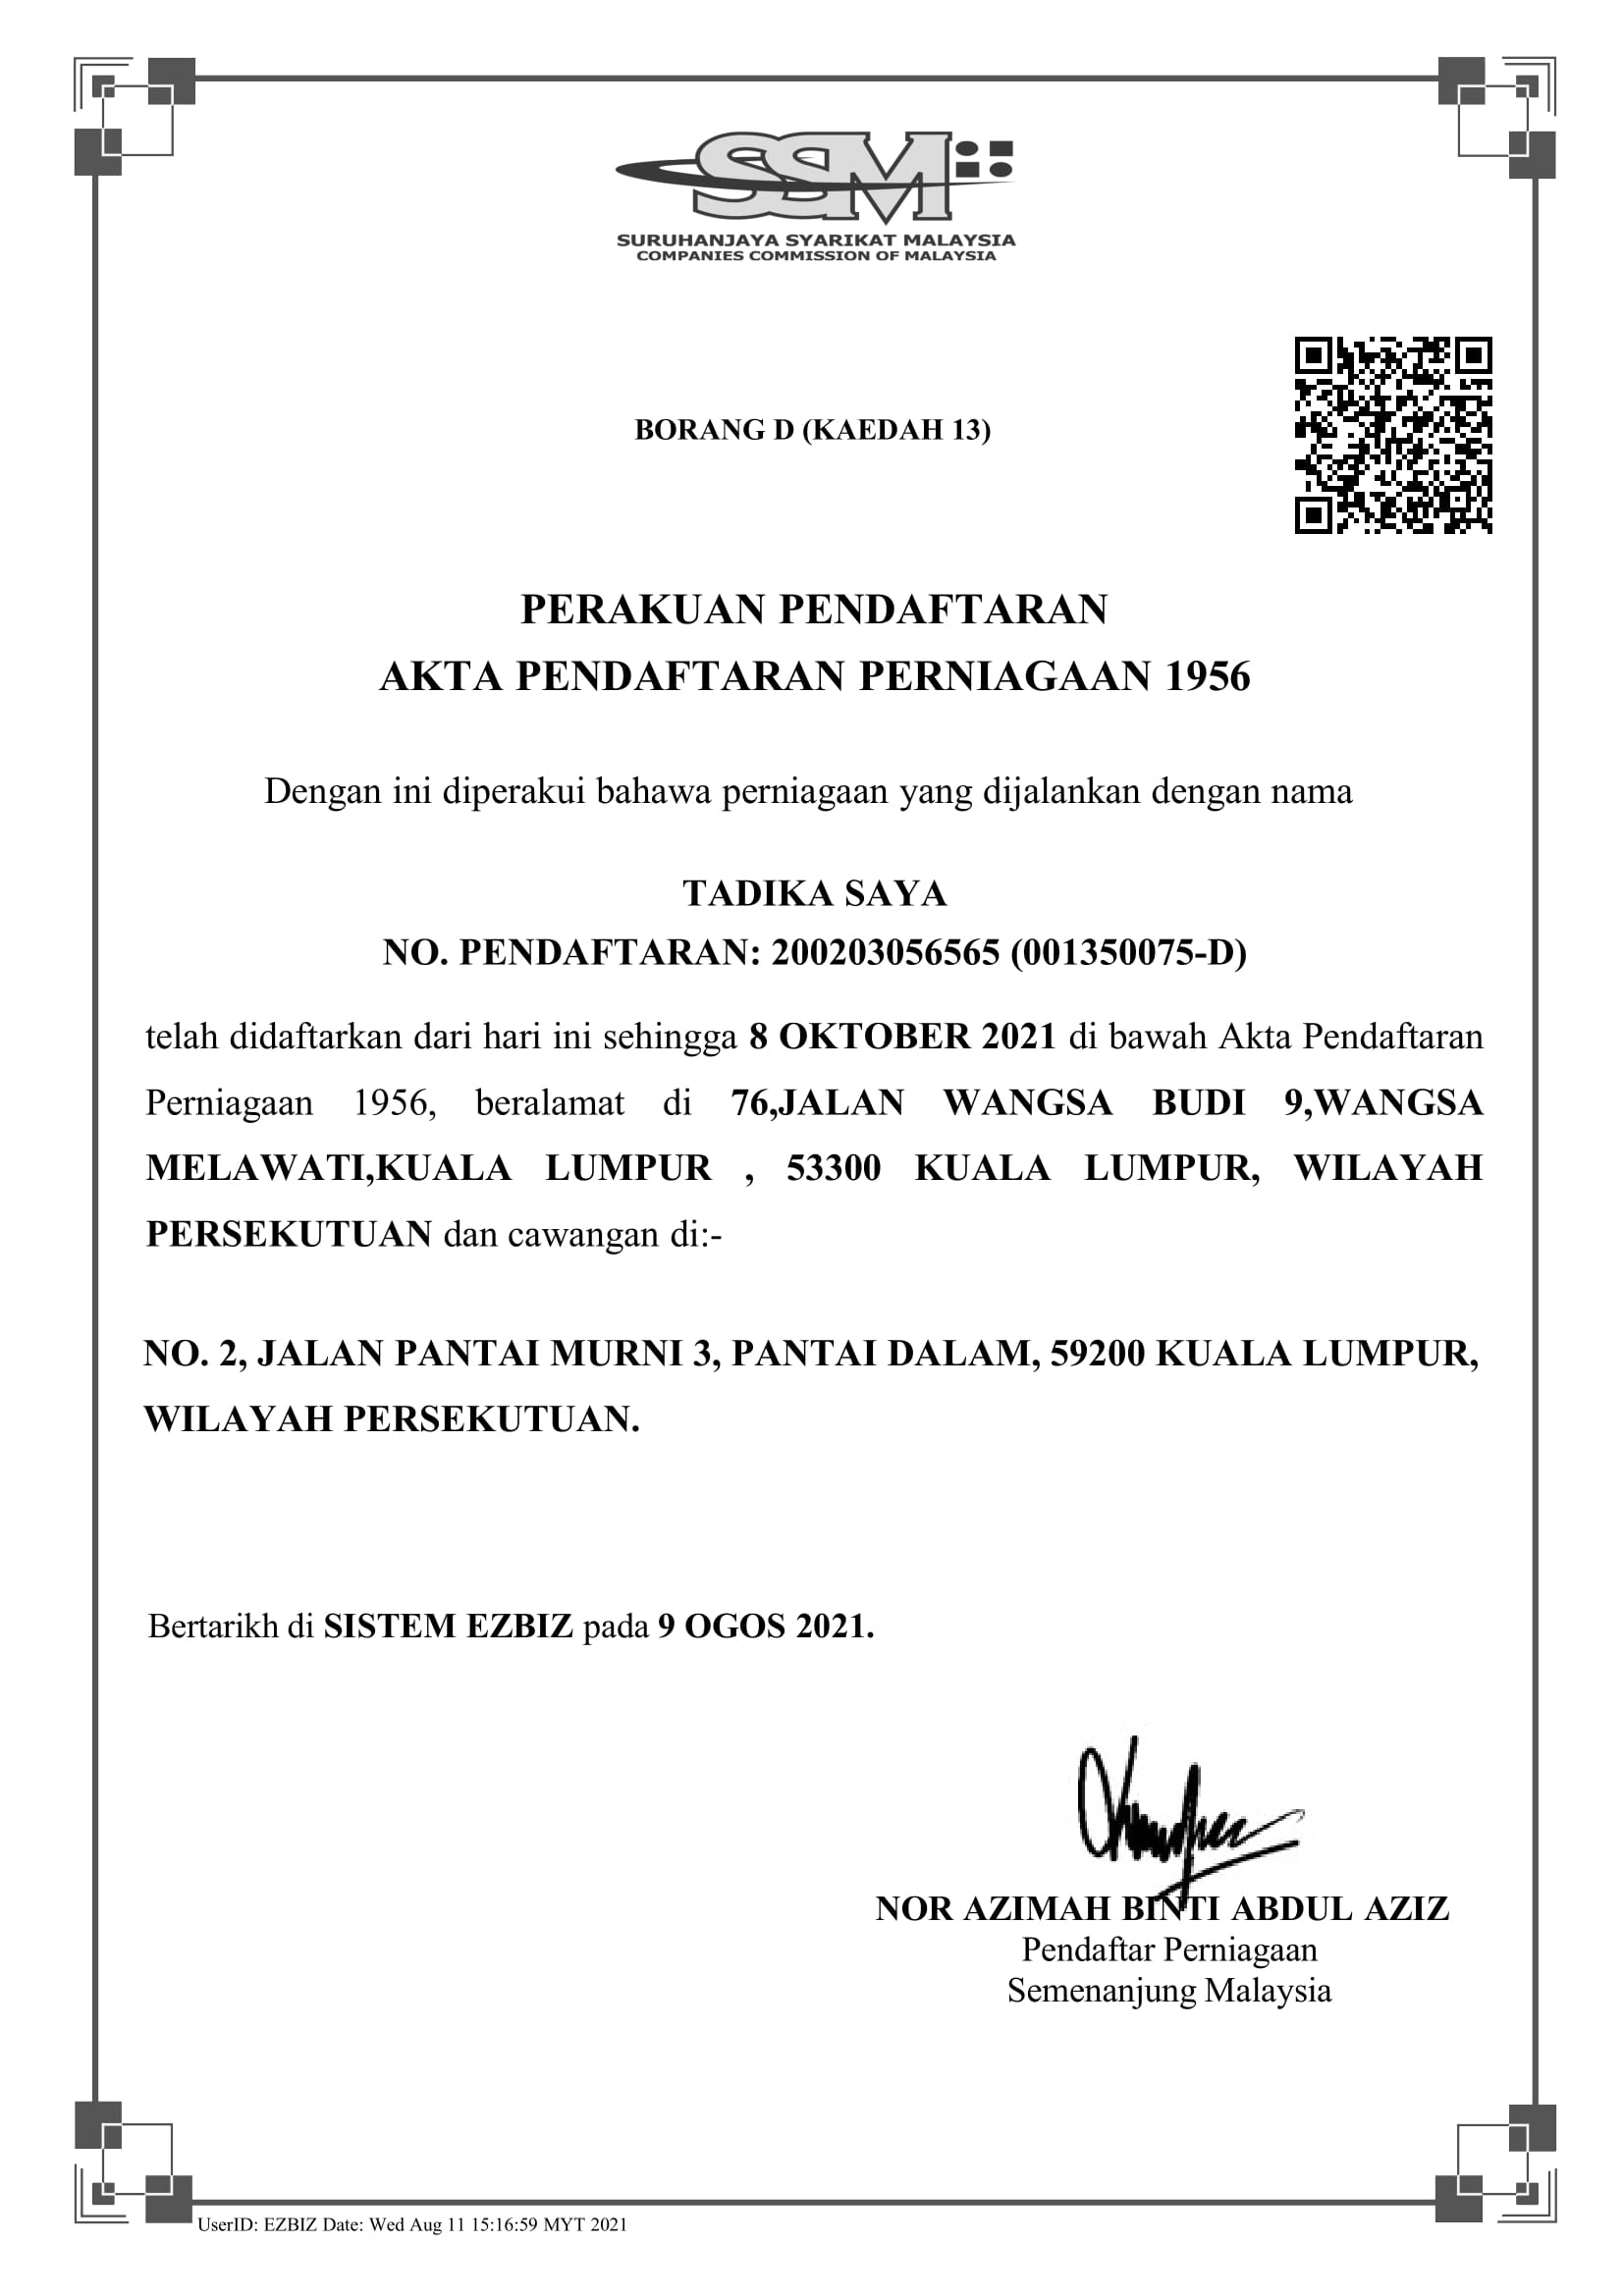 Certified by the Ministry of Education - License number (Tadika Saya: 001350075D)